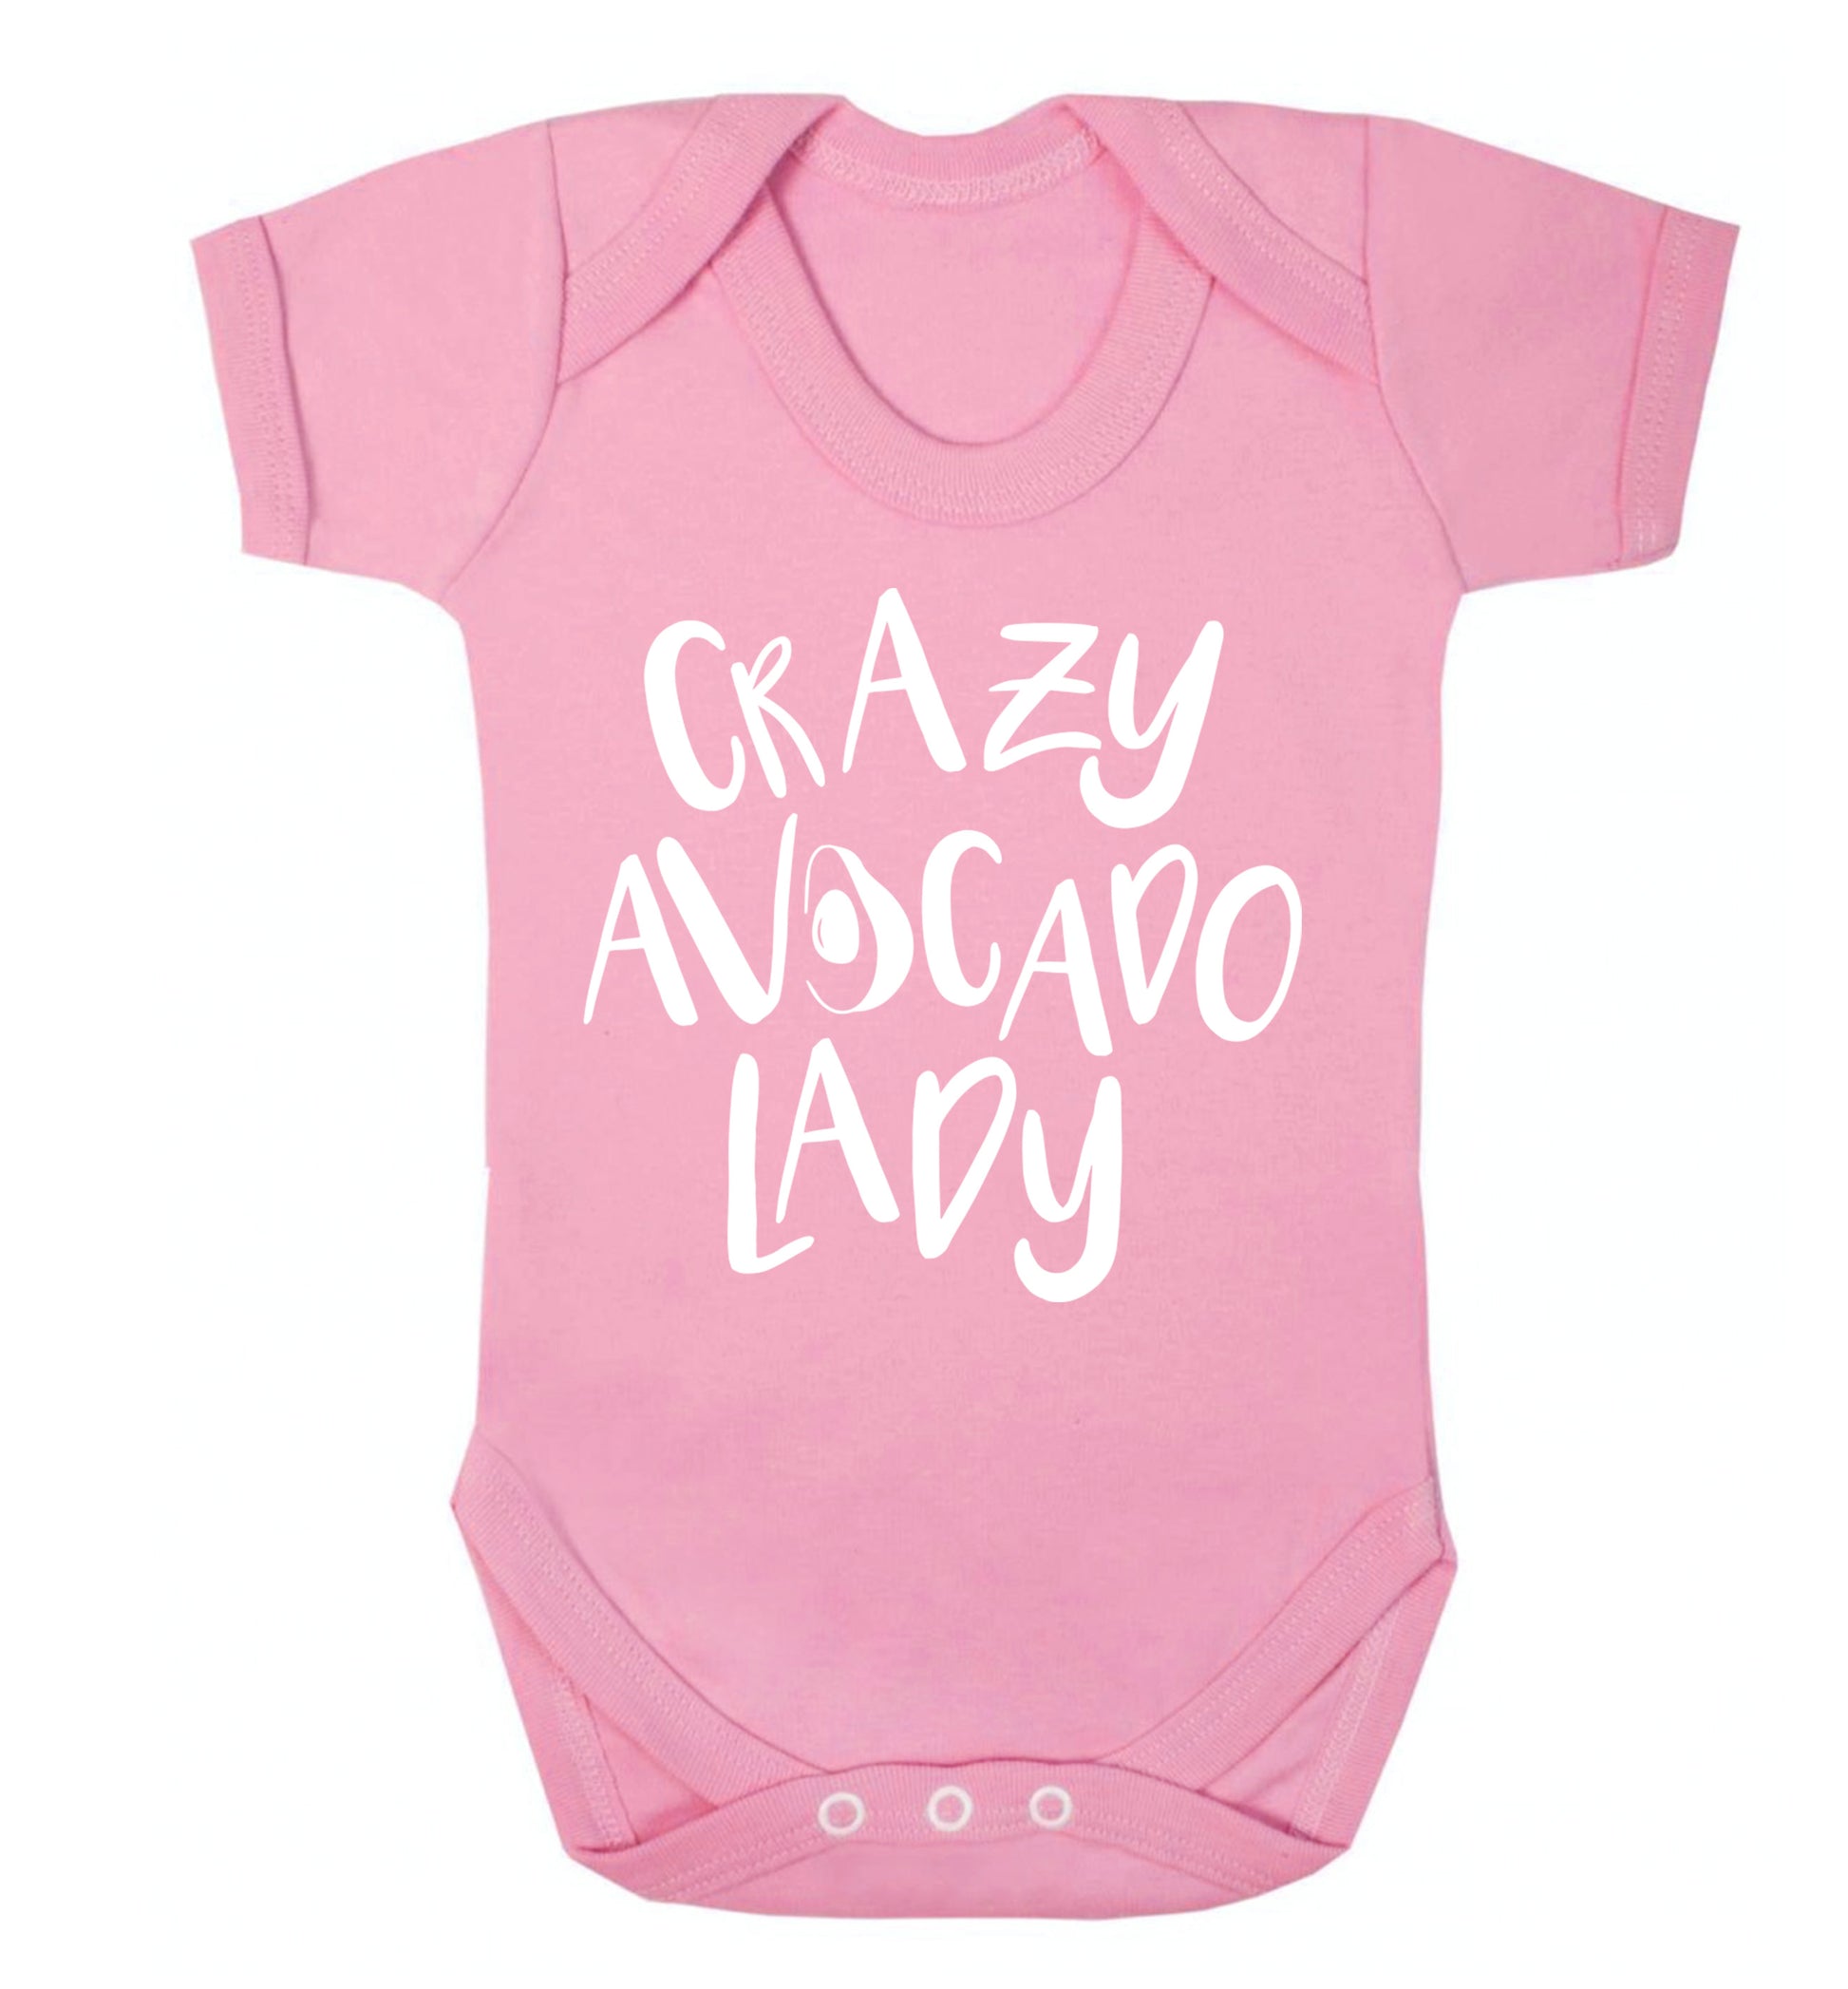 Crazy avocado lady Baby Vest pale pink 18-24 months